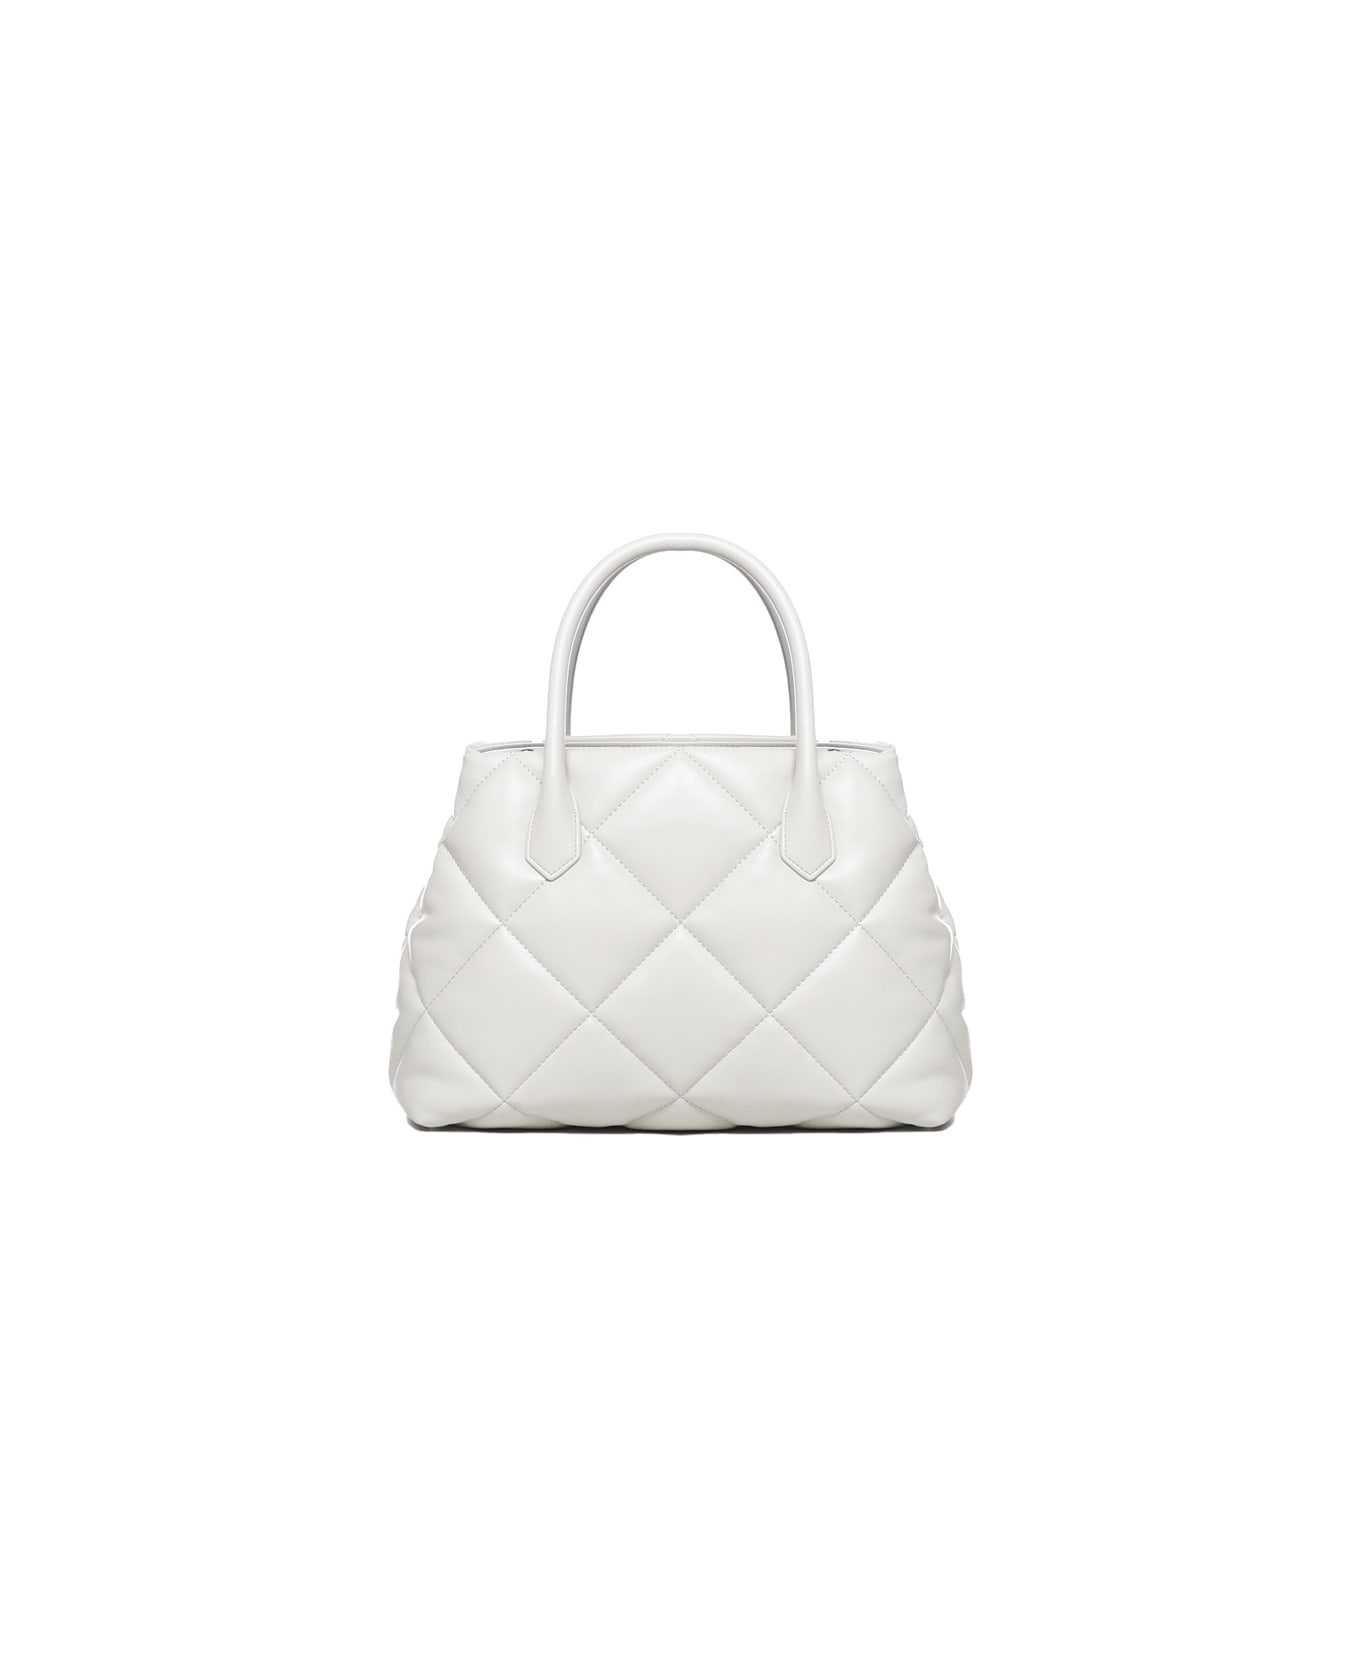 Emporio Armani Quilted Effect Hand Bag - White バッグ